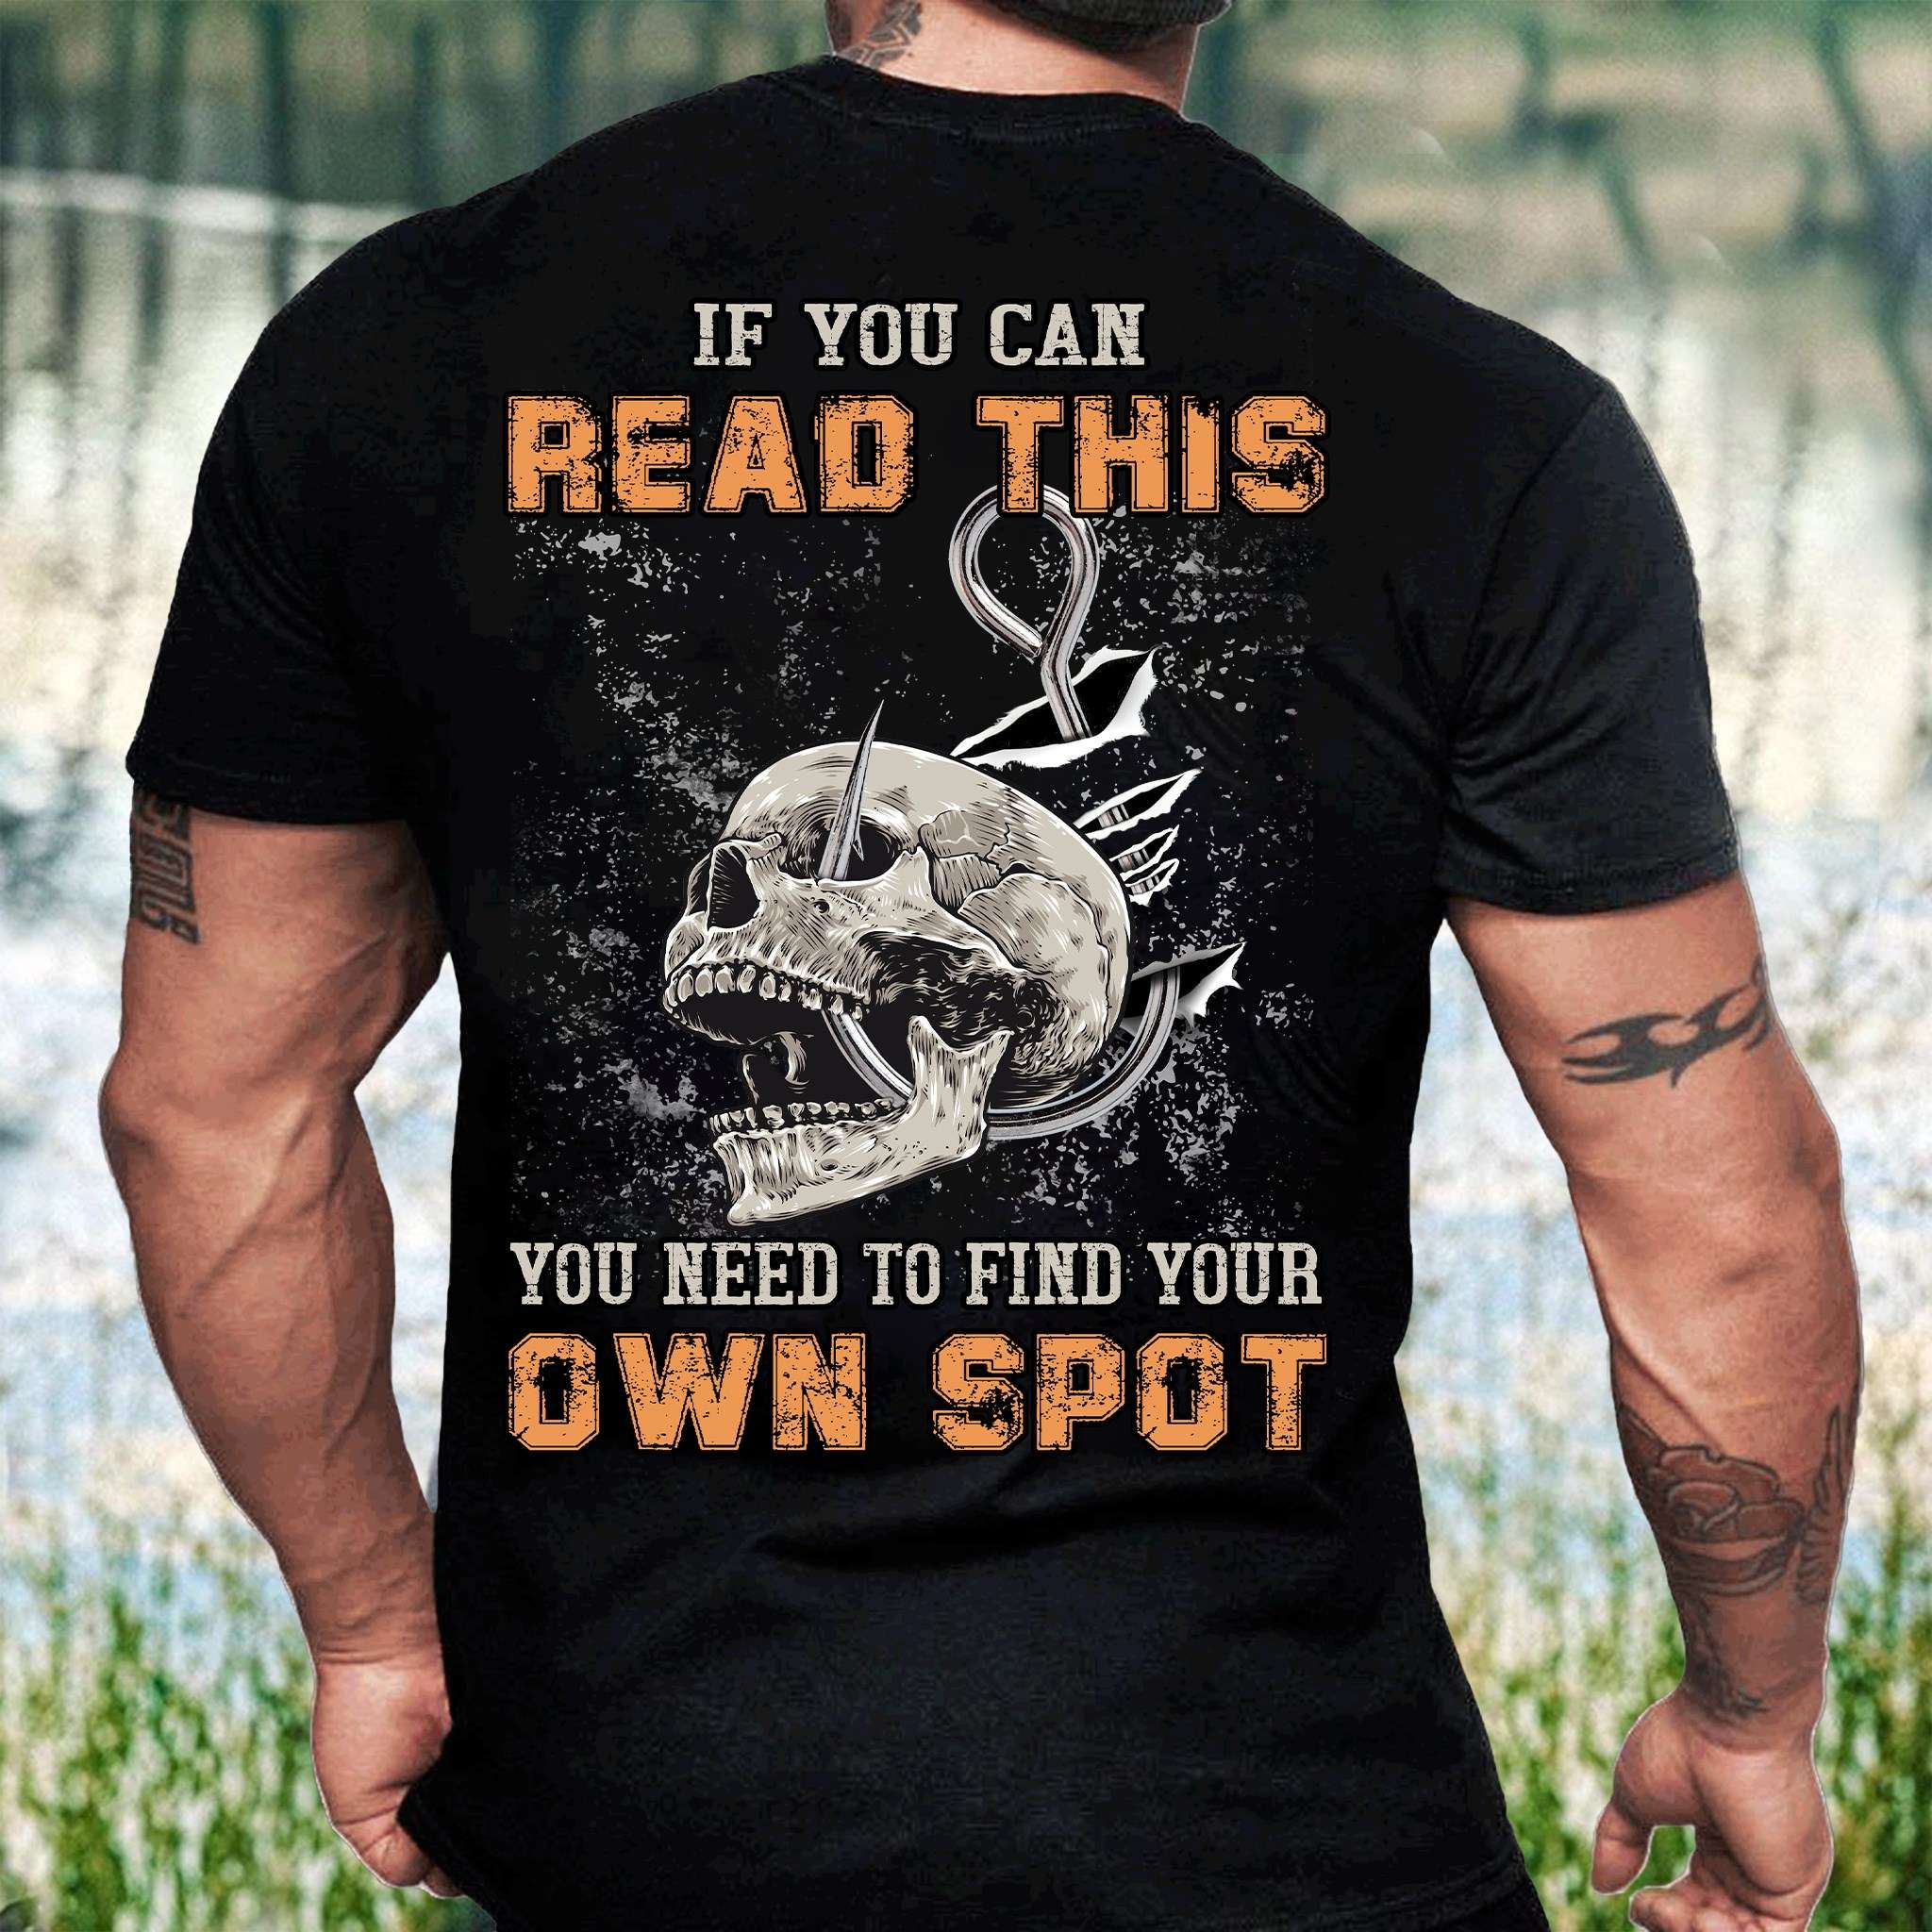 If you can read this you need to find your own spot - Hooked skull